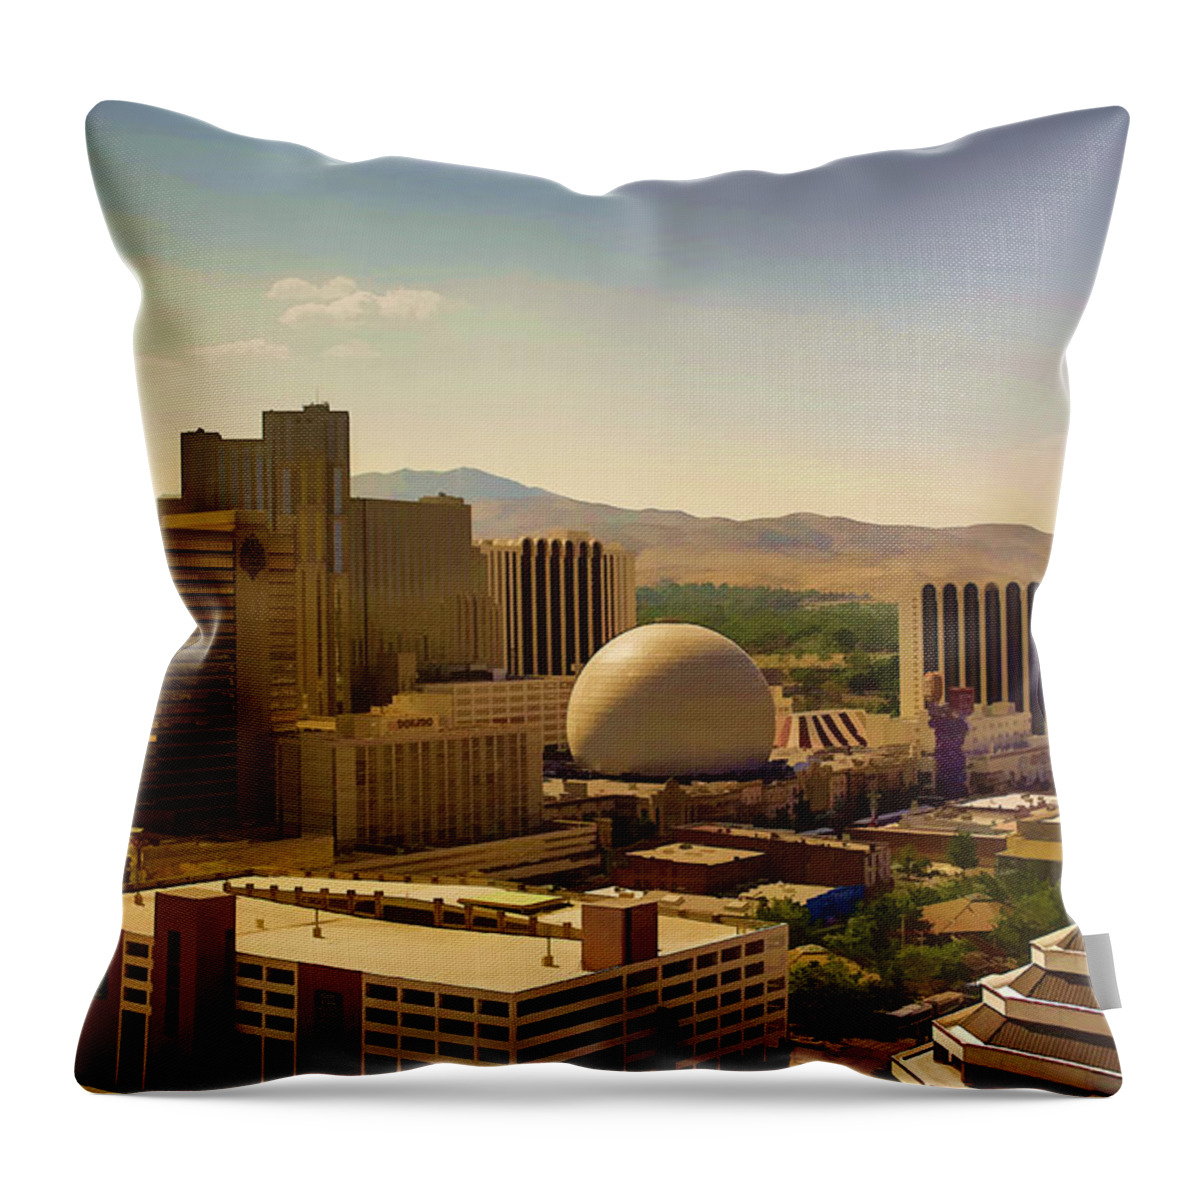 Reno Throw Pillow featuring the photograph Reno by Ricky Barnard